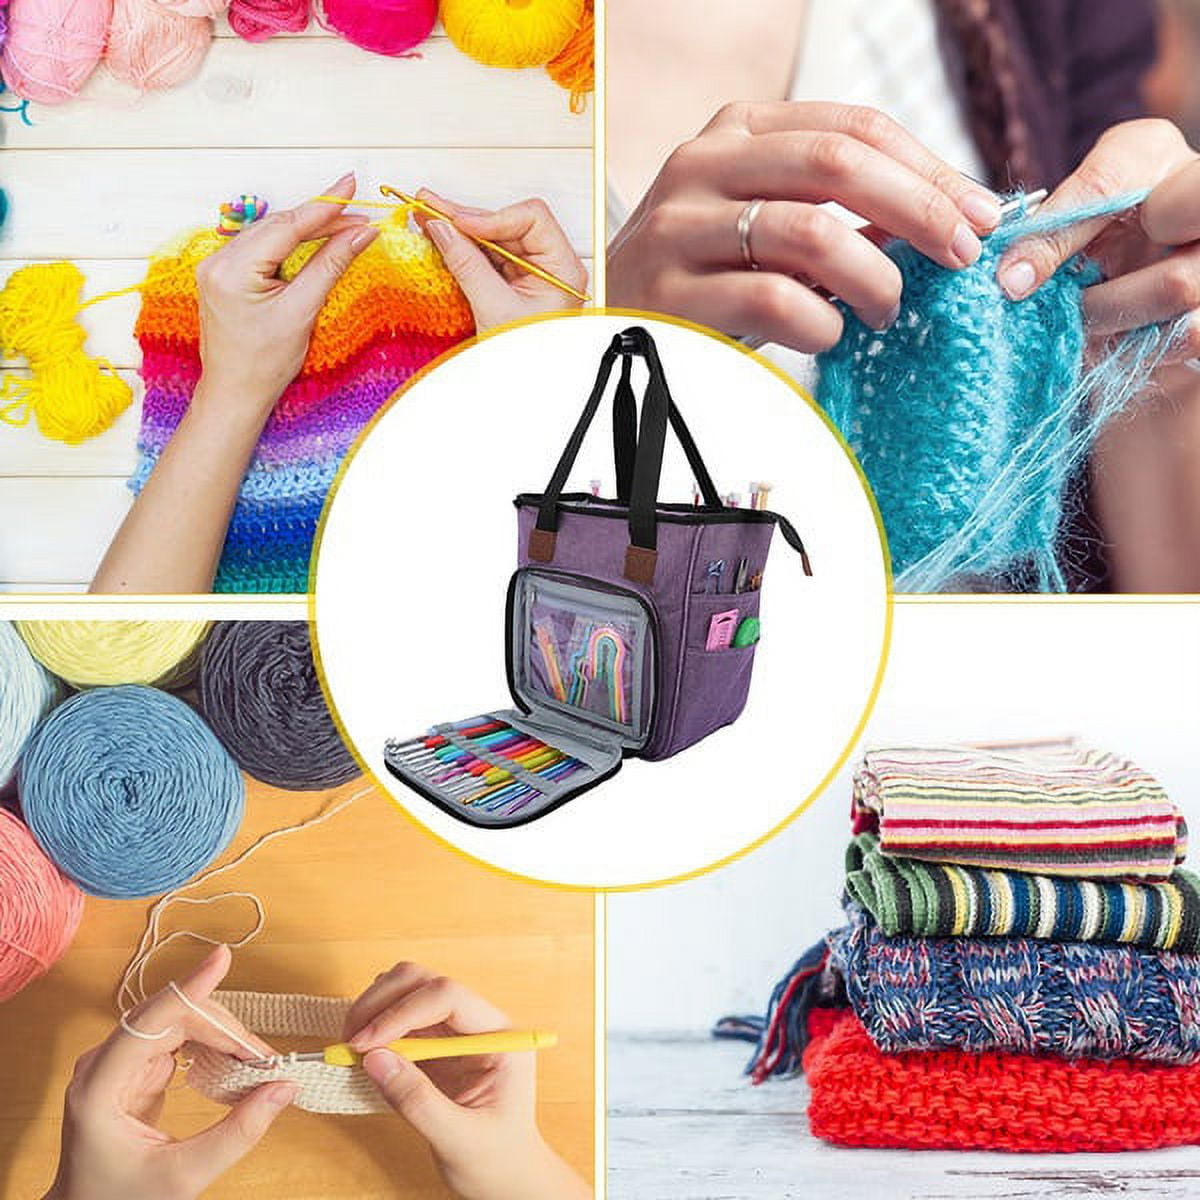 Jetcloudlive 2020 Oxford Cloth Wool Crochet Hooks Needles Household  Knitting Bag Storage Bags Sewing Supplies 